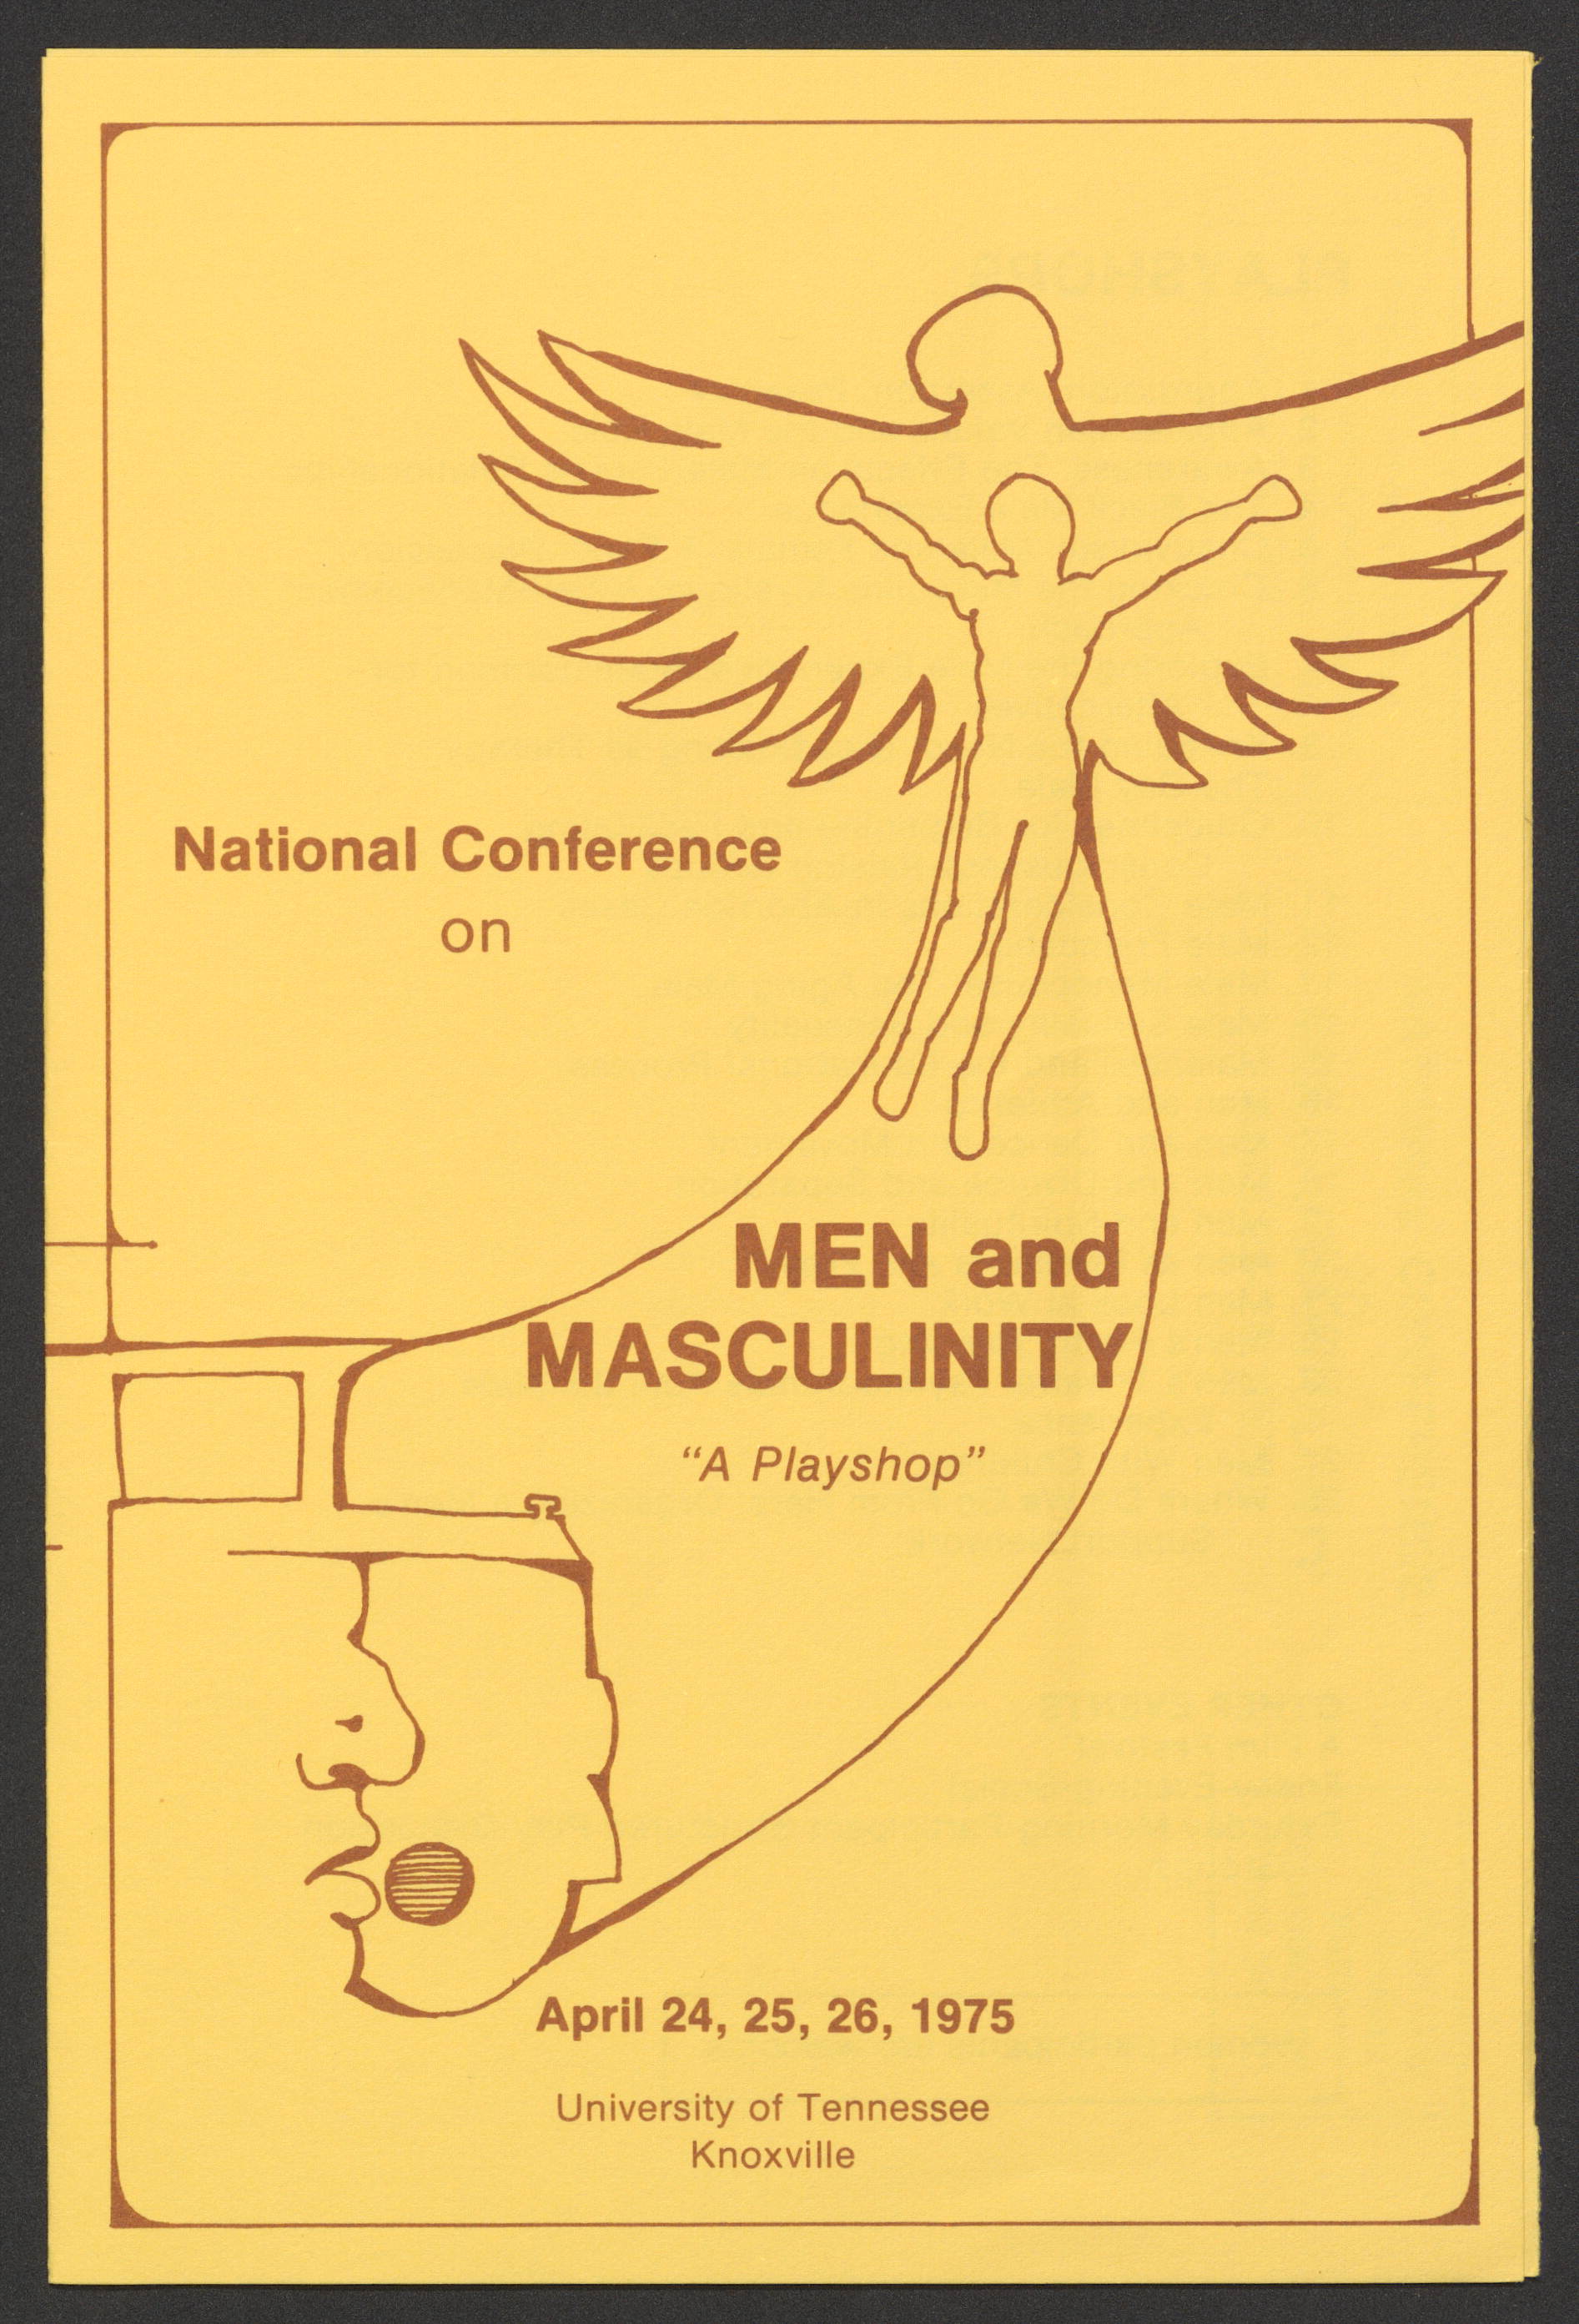 Men and Masculinity Conference